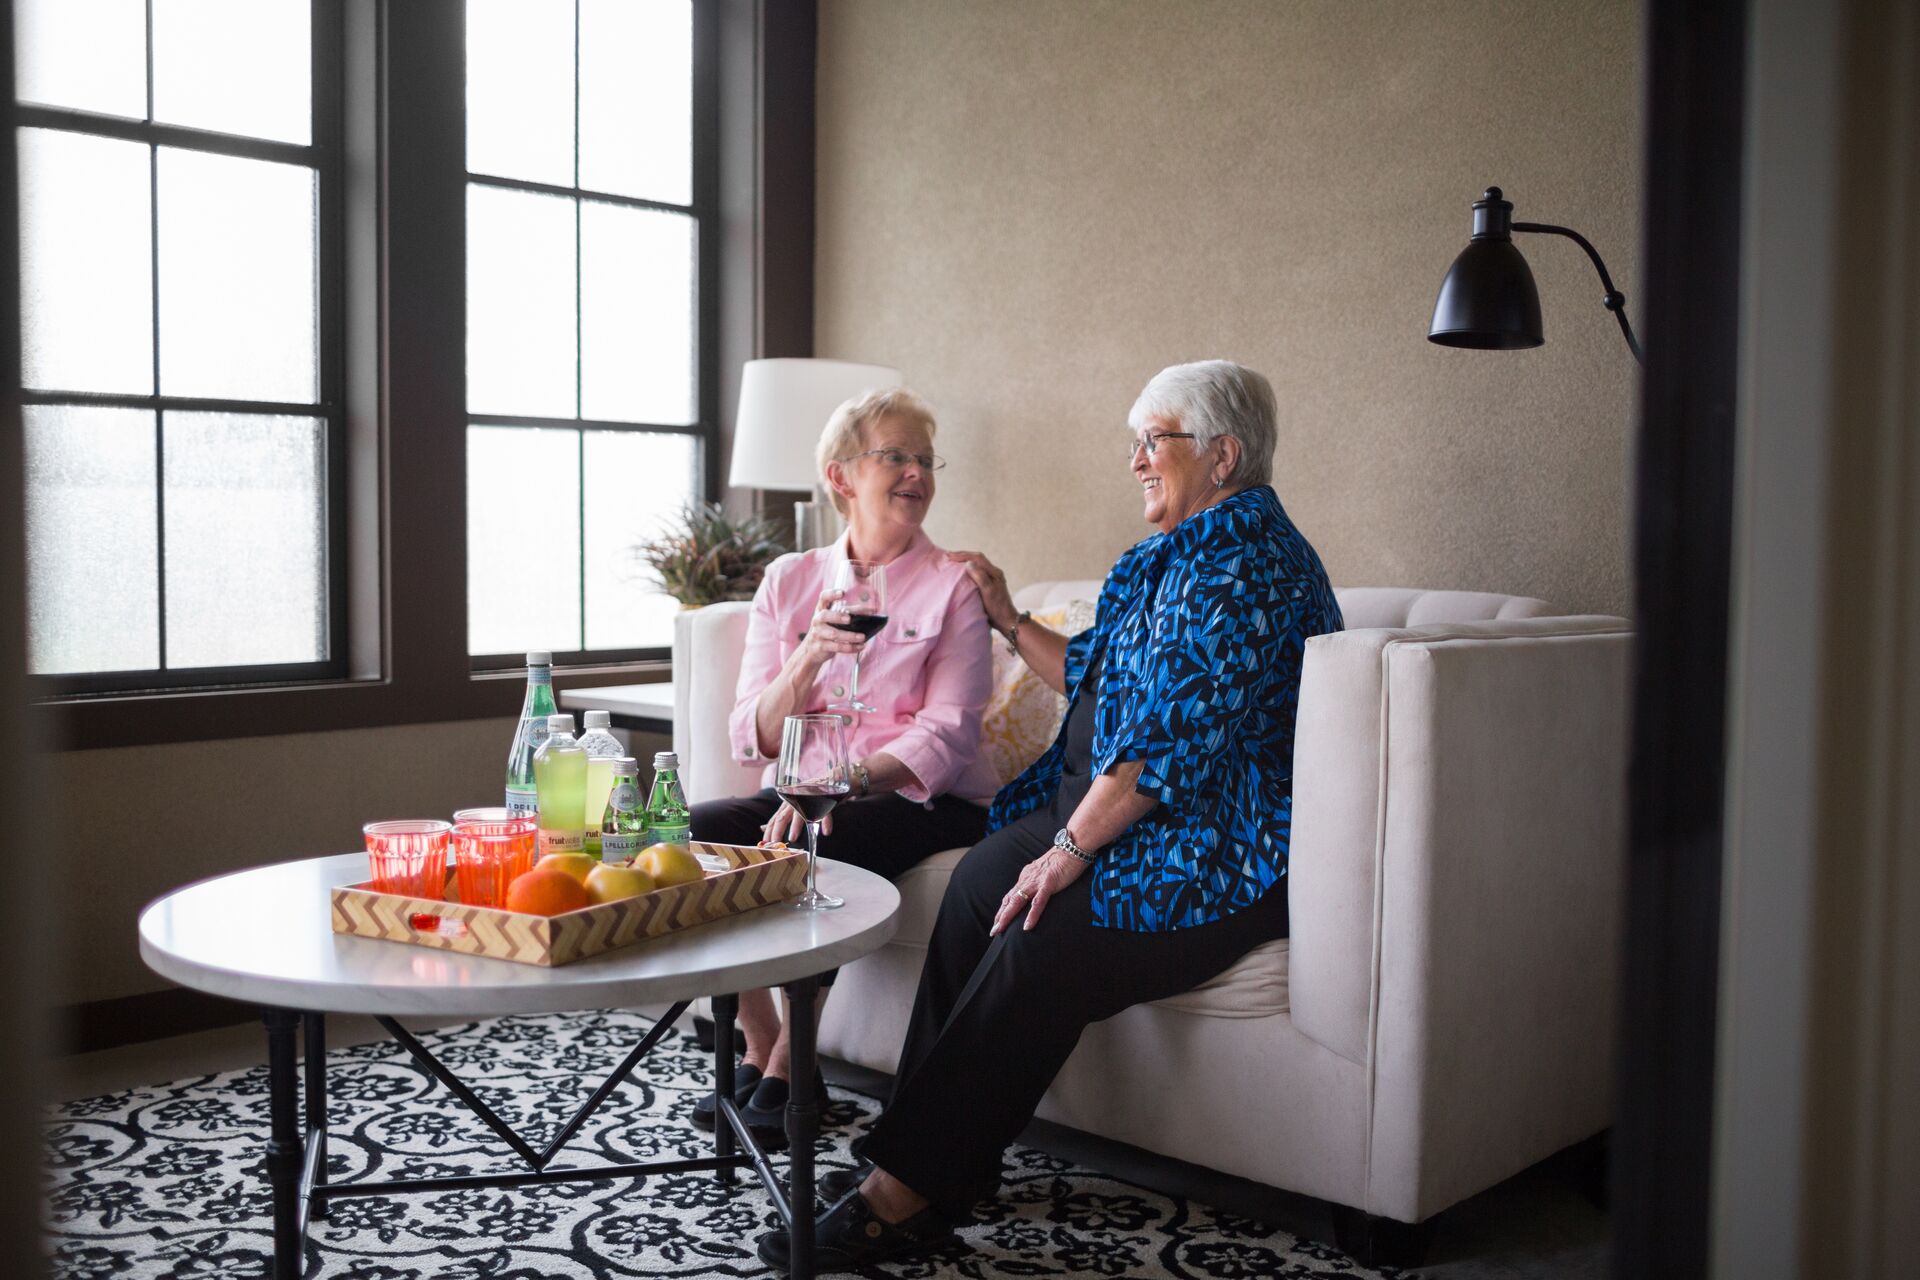 Two senior women sit and visit over drinks.